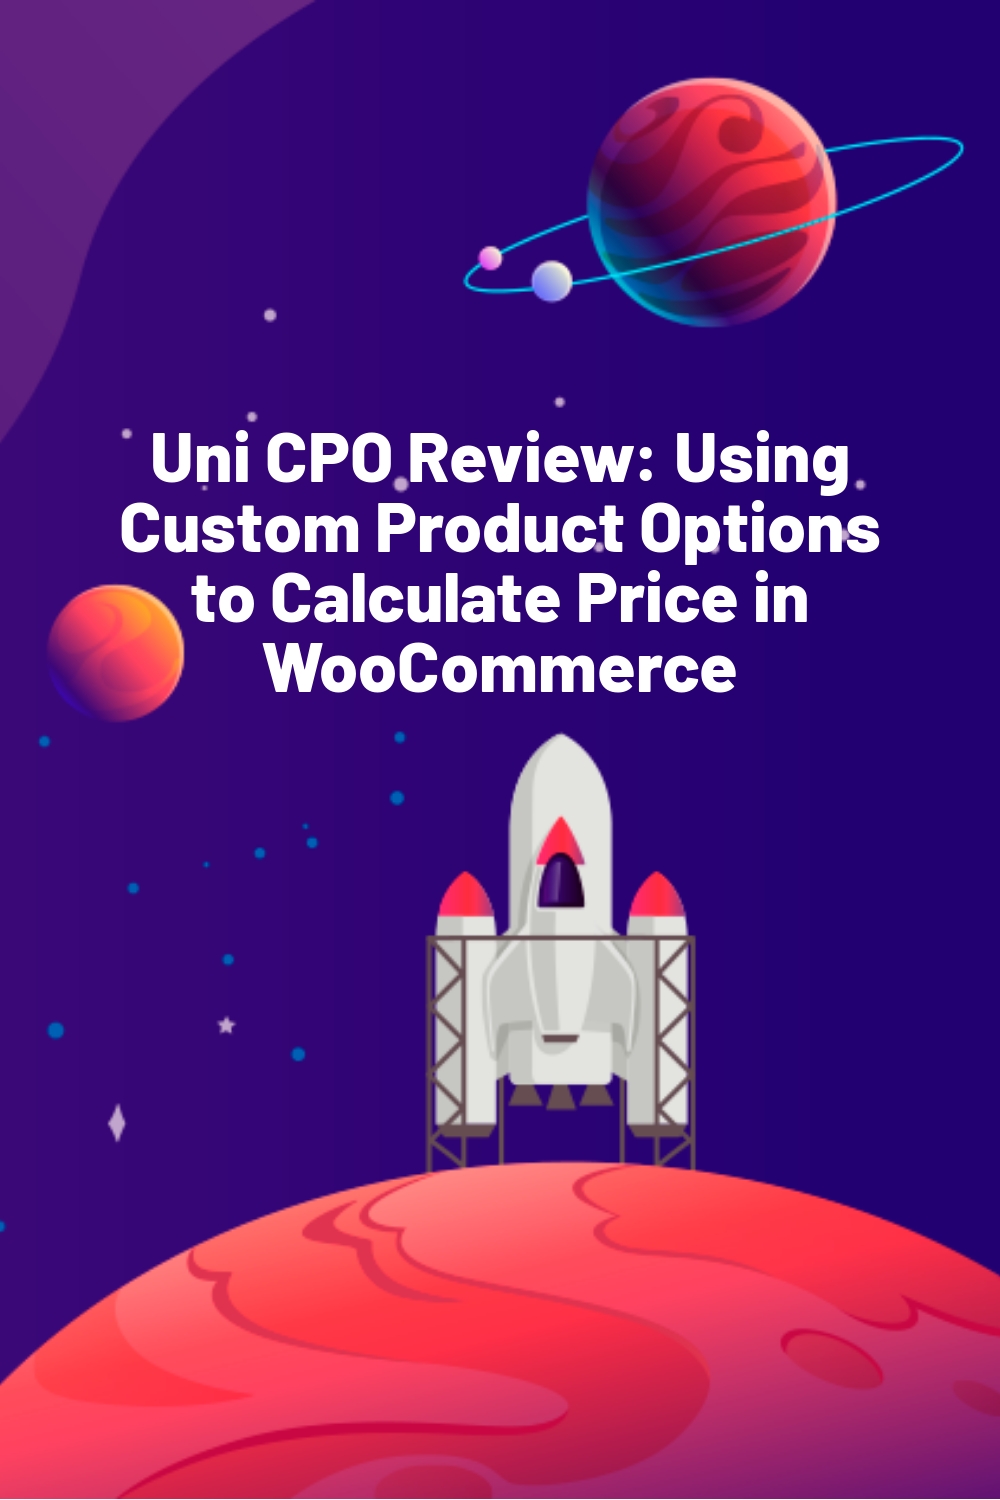 Uni CPO Review: Using Custom Product Options to Calculate Price in WooCommerce